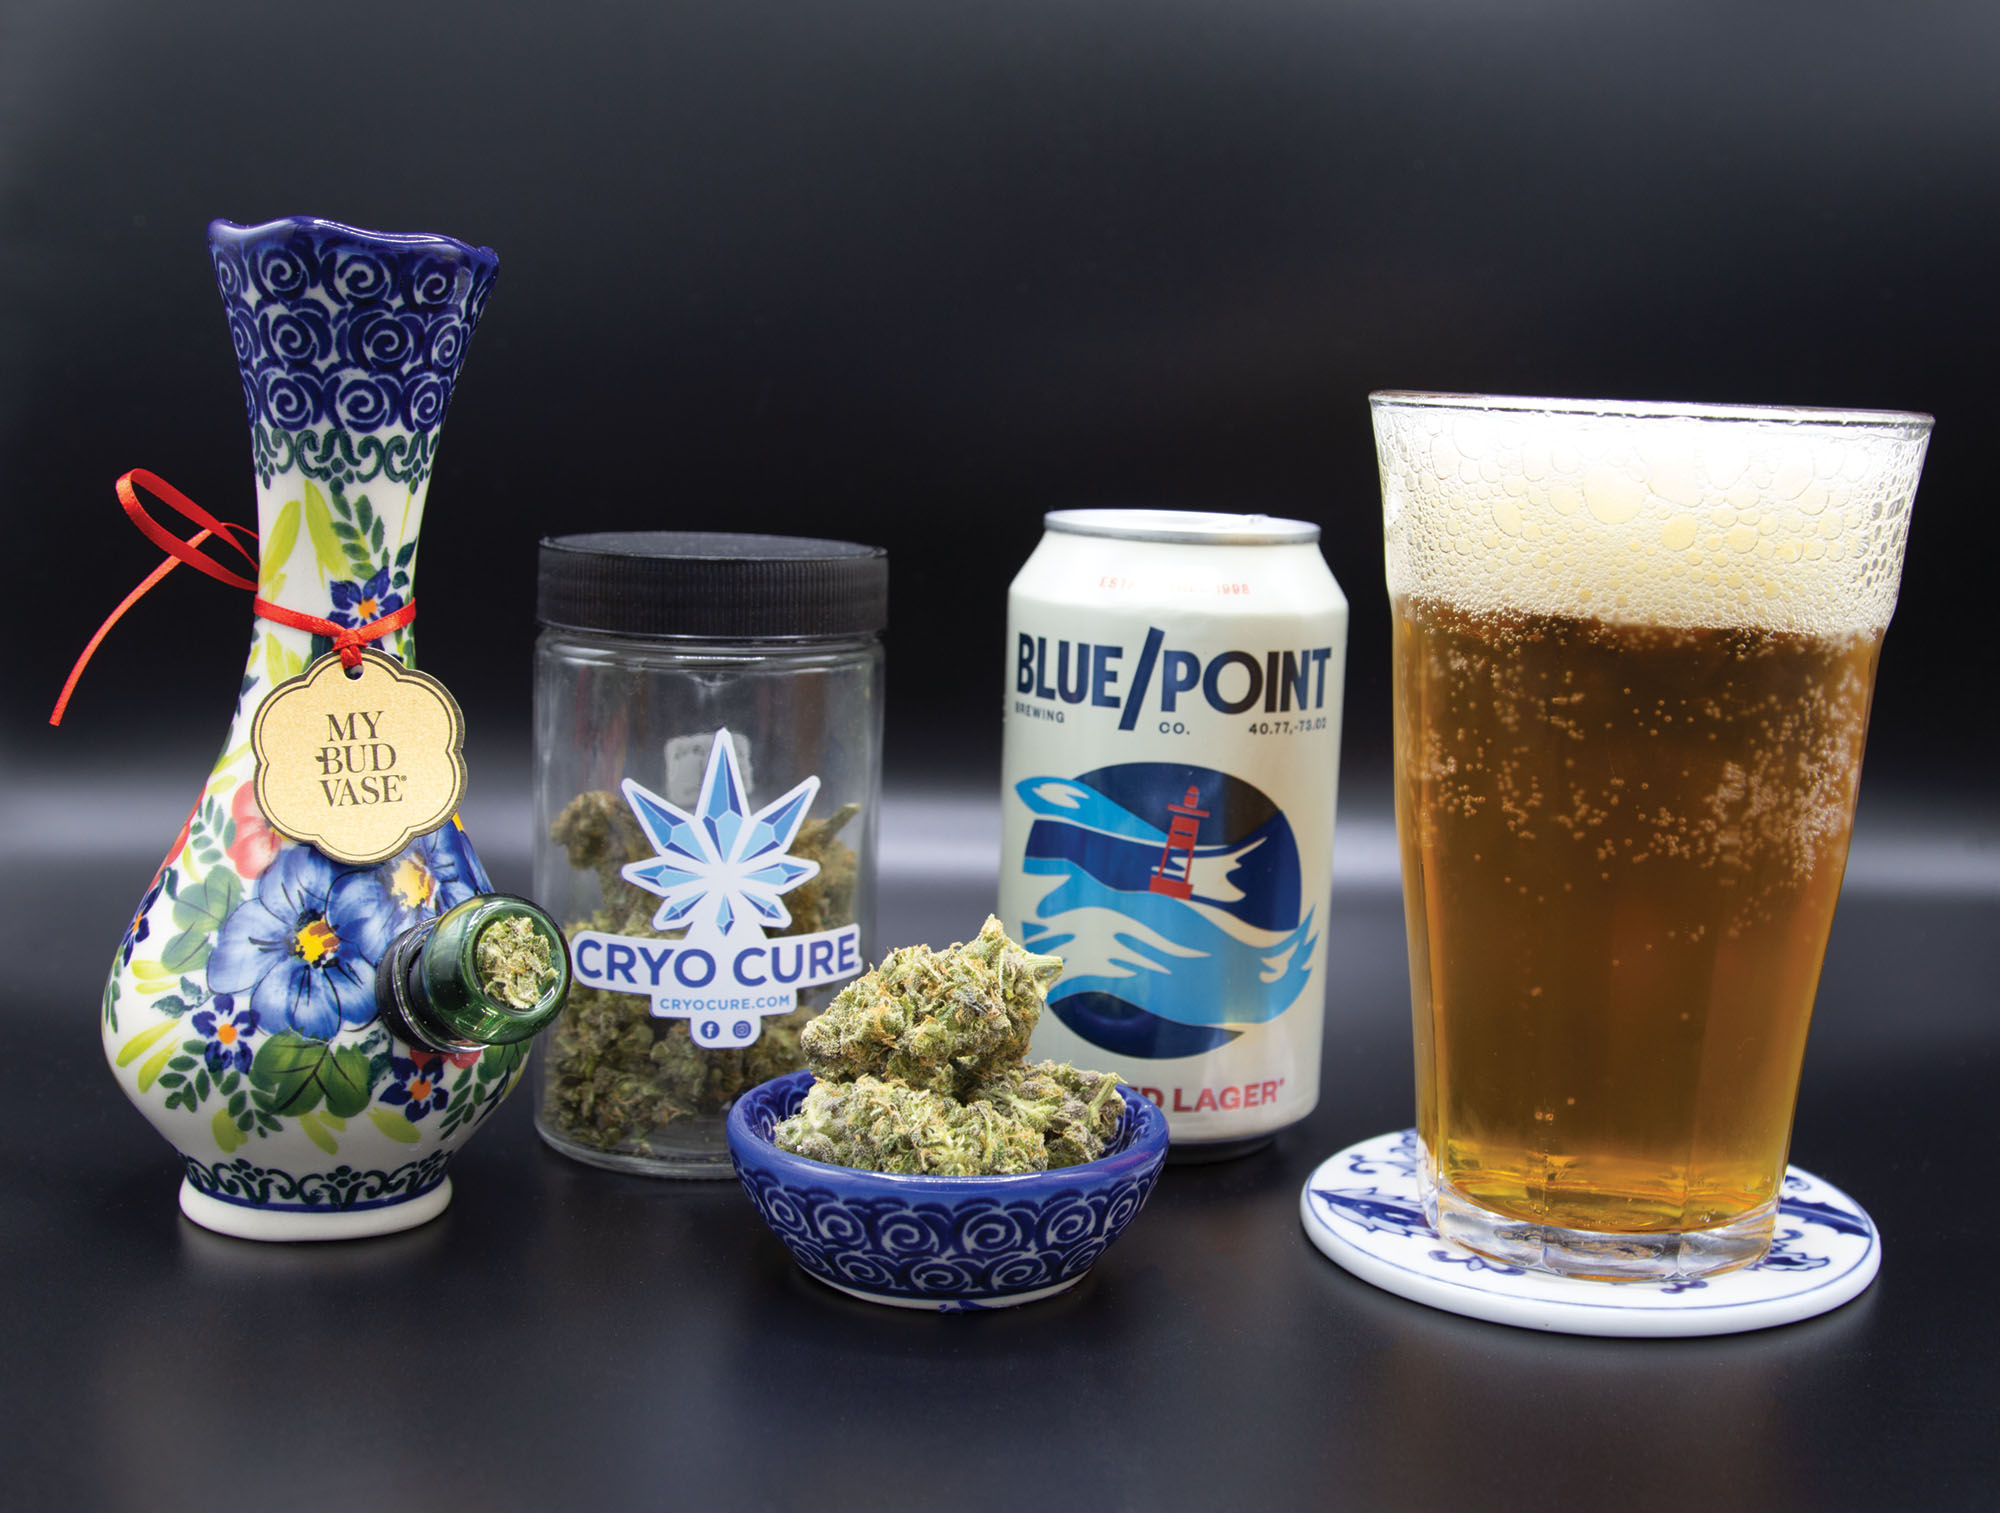 Blue Point Toasted Lager x Cryo Cure East Coast Sour Diesel